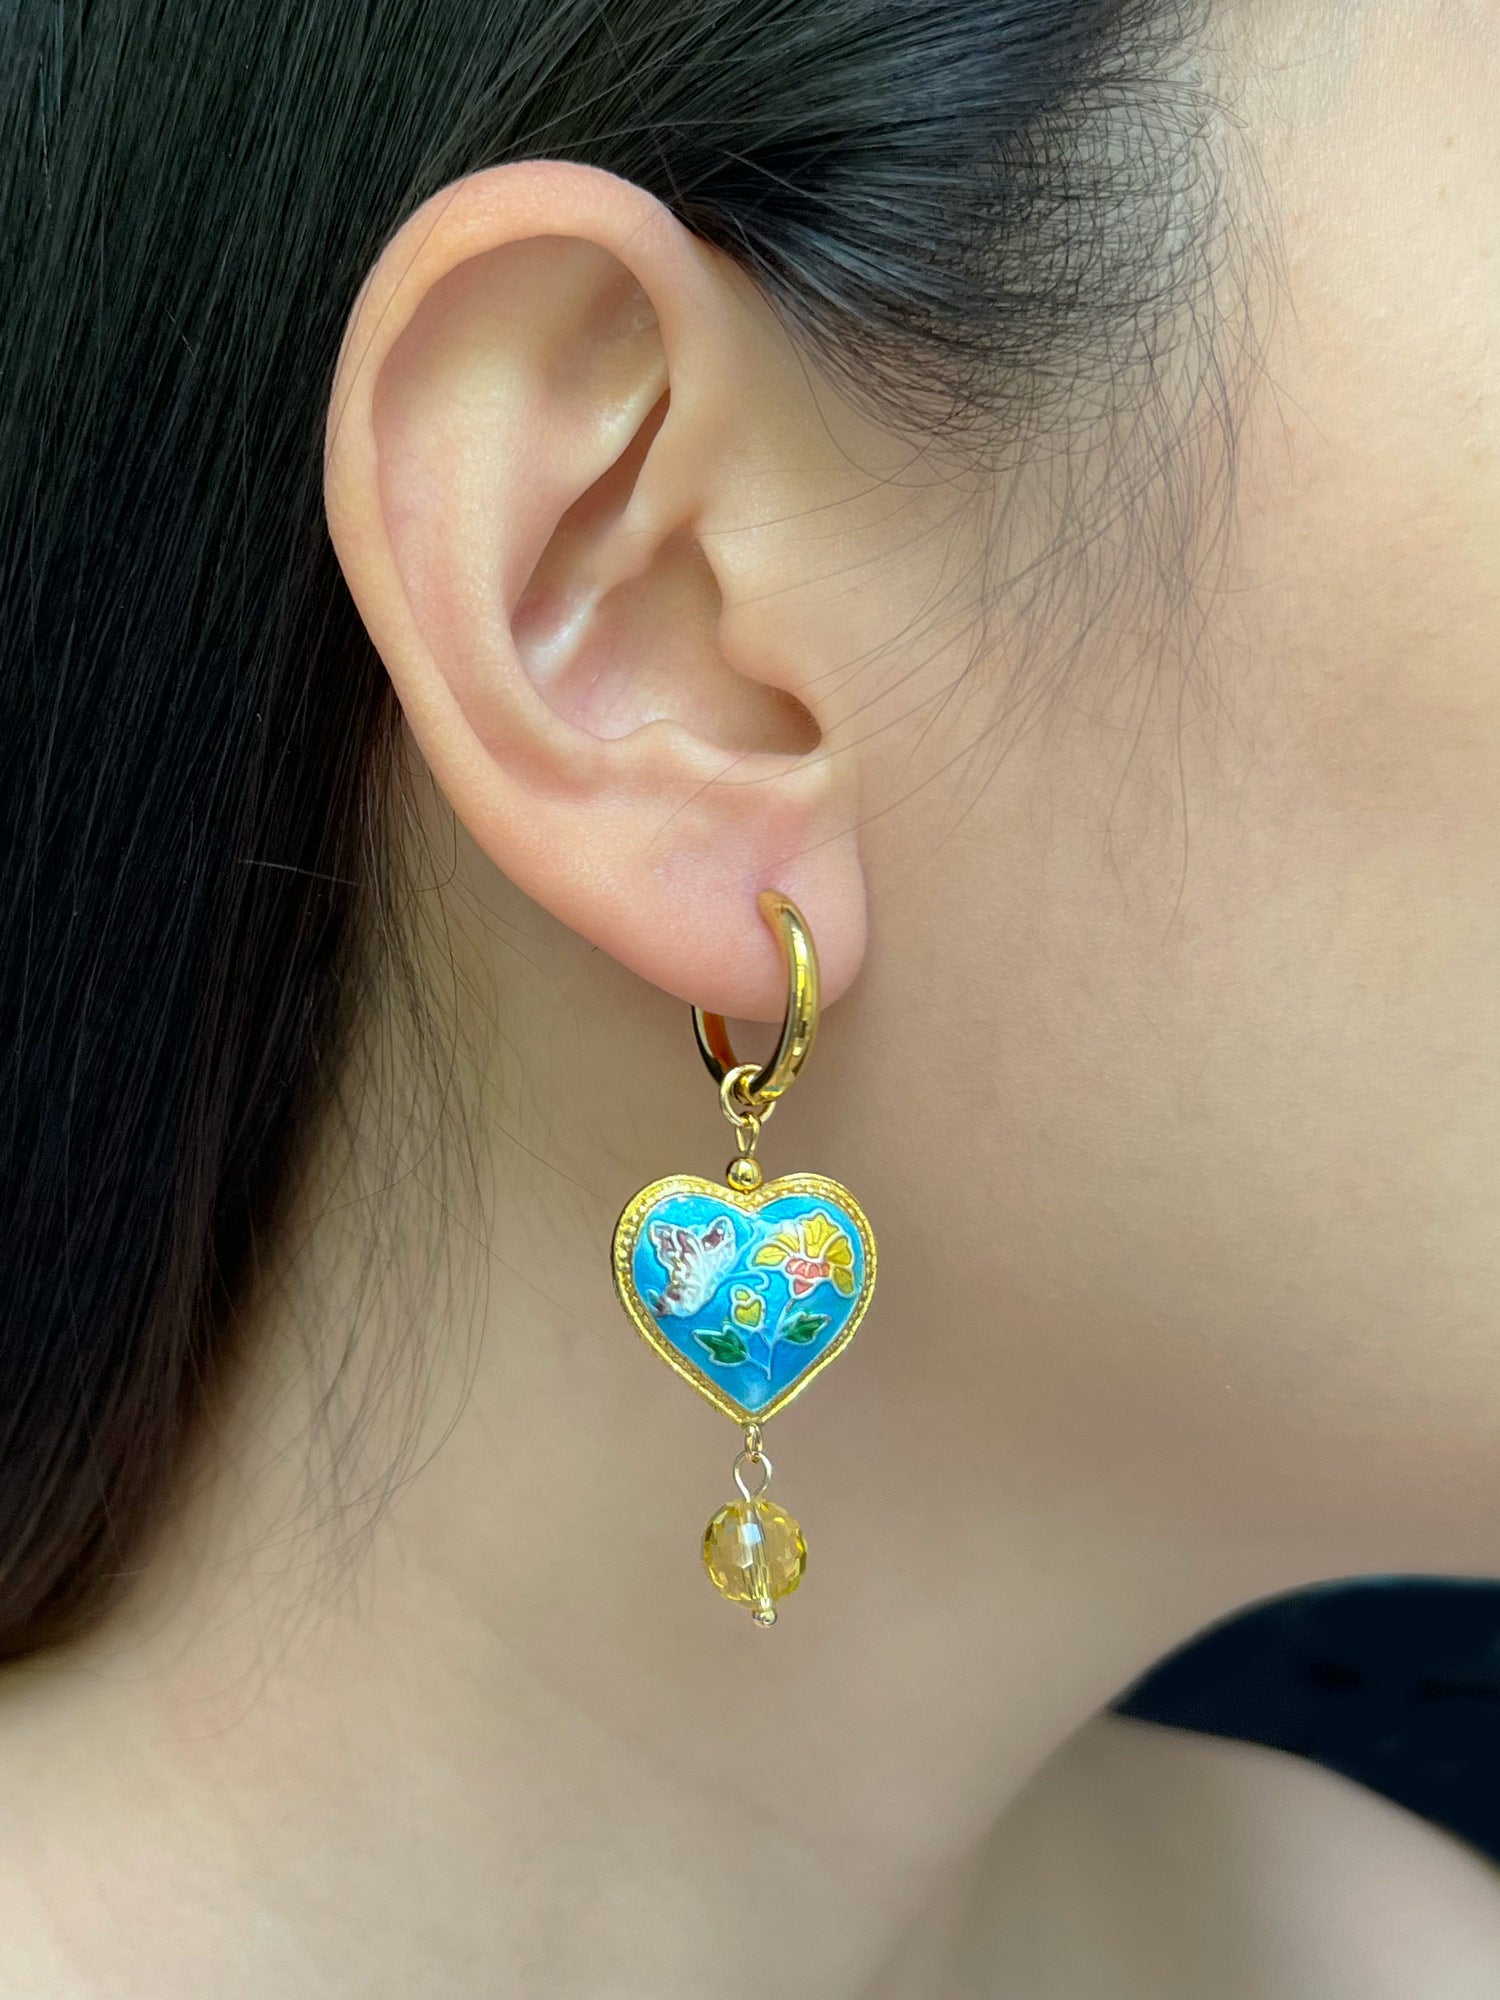 Blue Cloisonne Heart Dangling Earrings with Yellow Glass Crystal